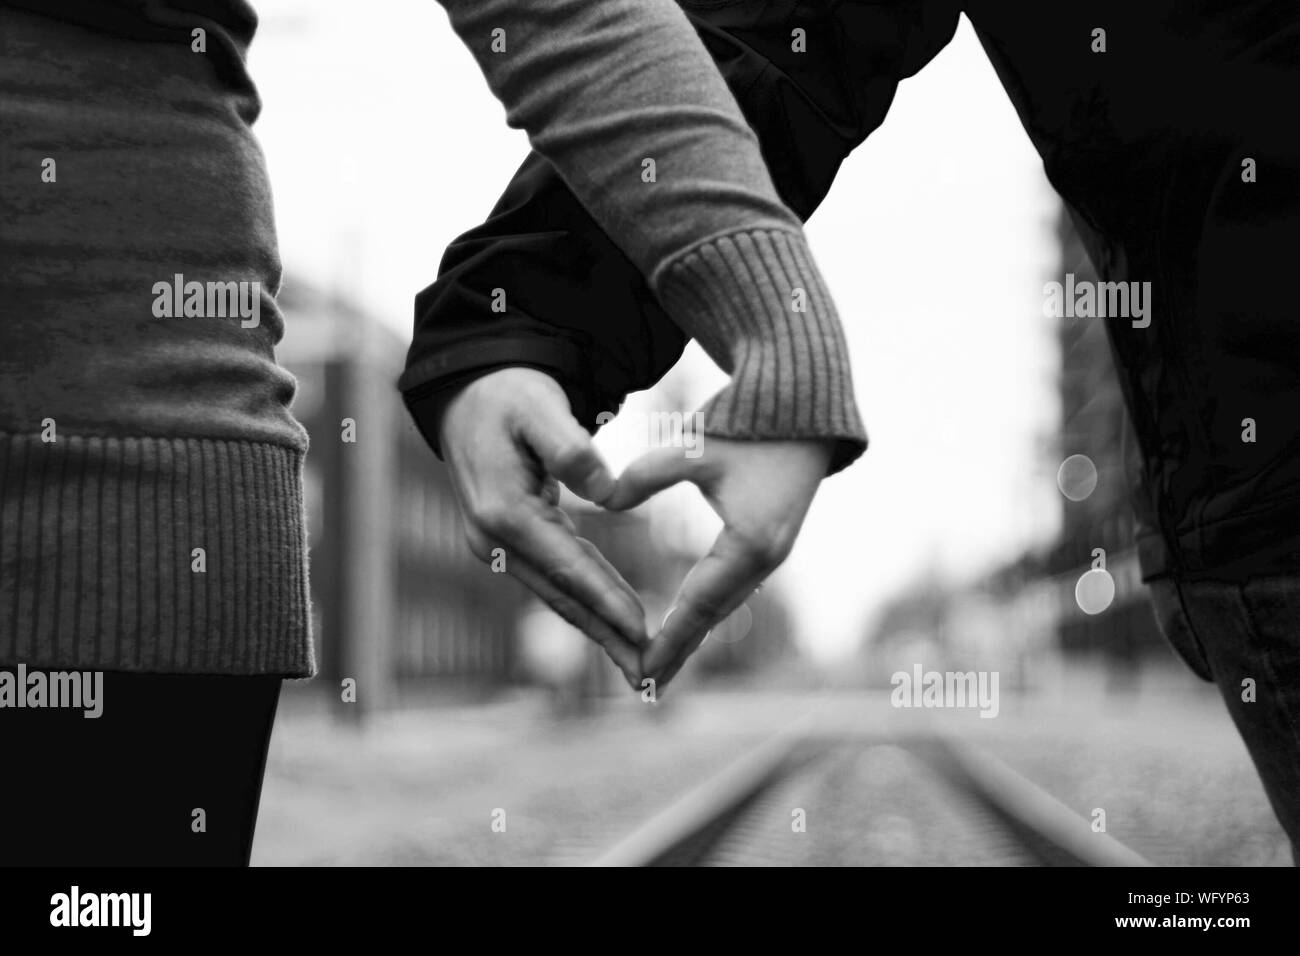 Black and wite pics of couples making love Couple Making Love Black And White Stock Photos Images Alamy